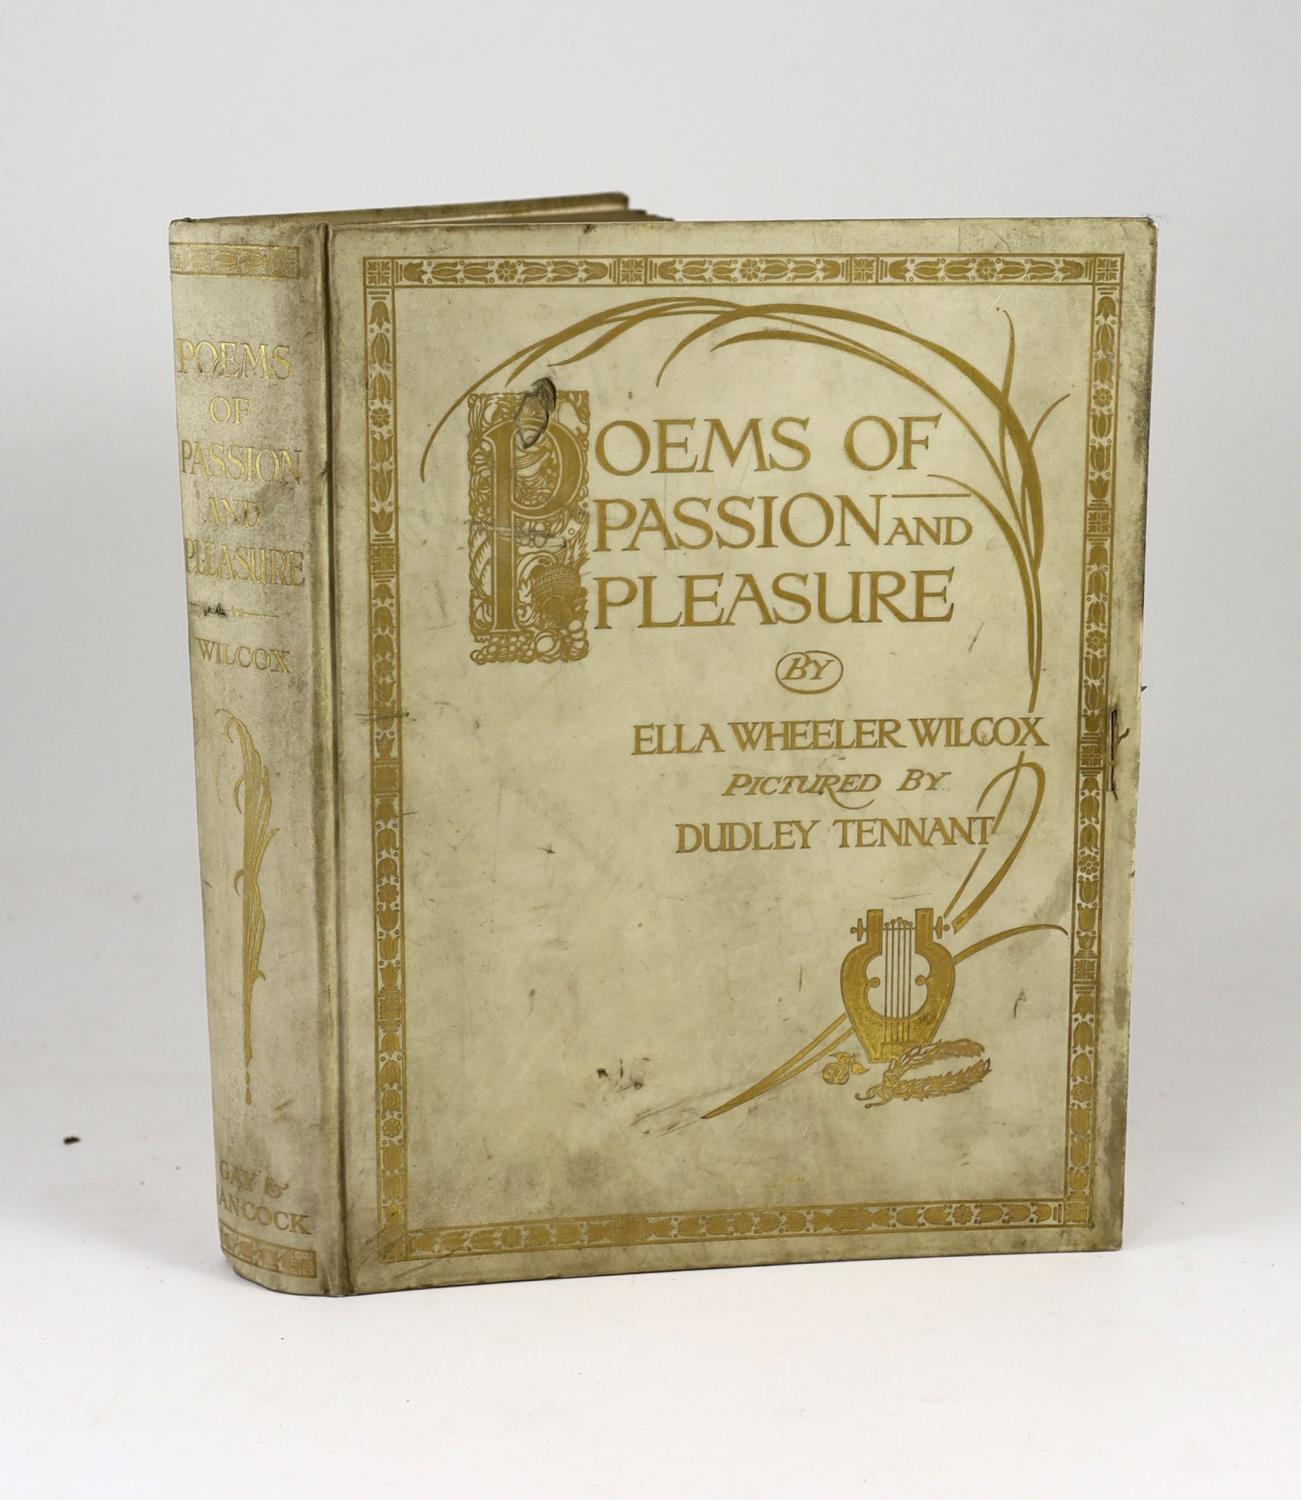 ° ° Wilcox, Ella Wheeler - Poems of Passion and Pleasure, de luxe issue, one of 500, signed by the